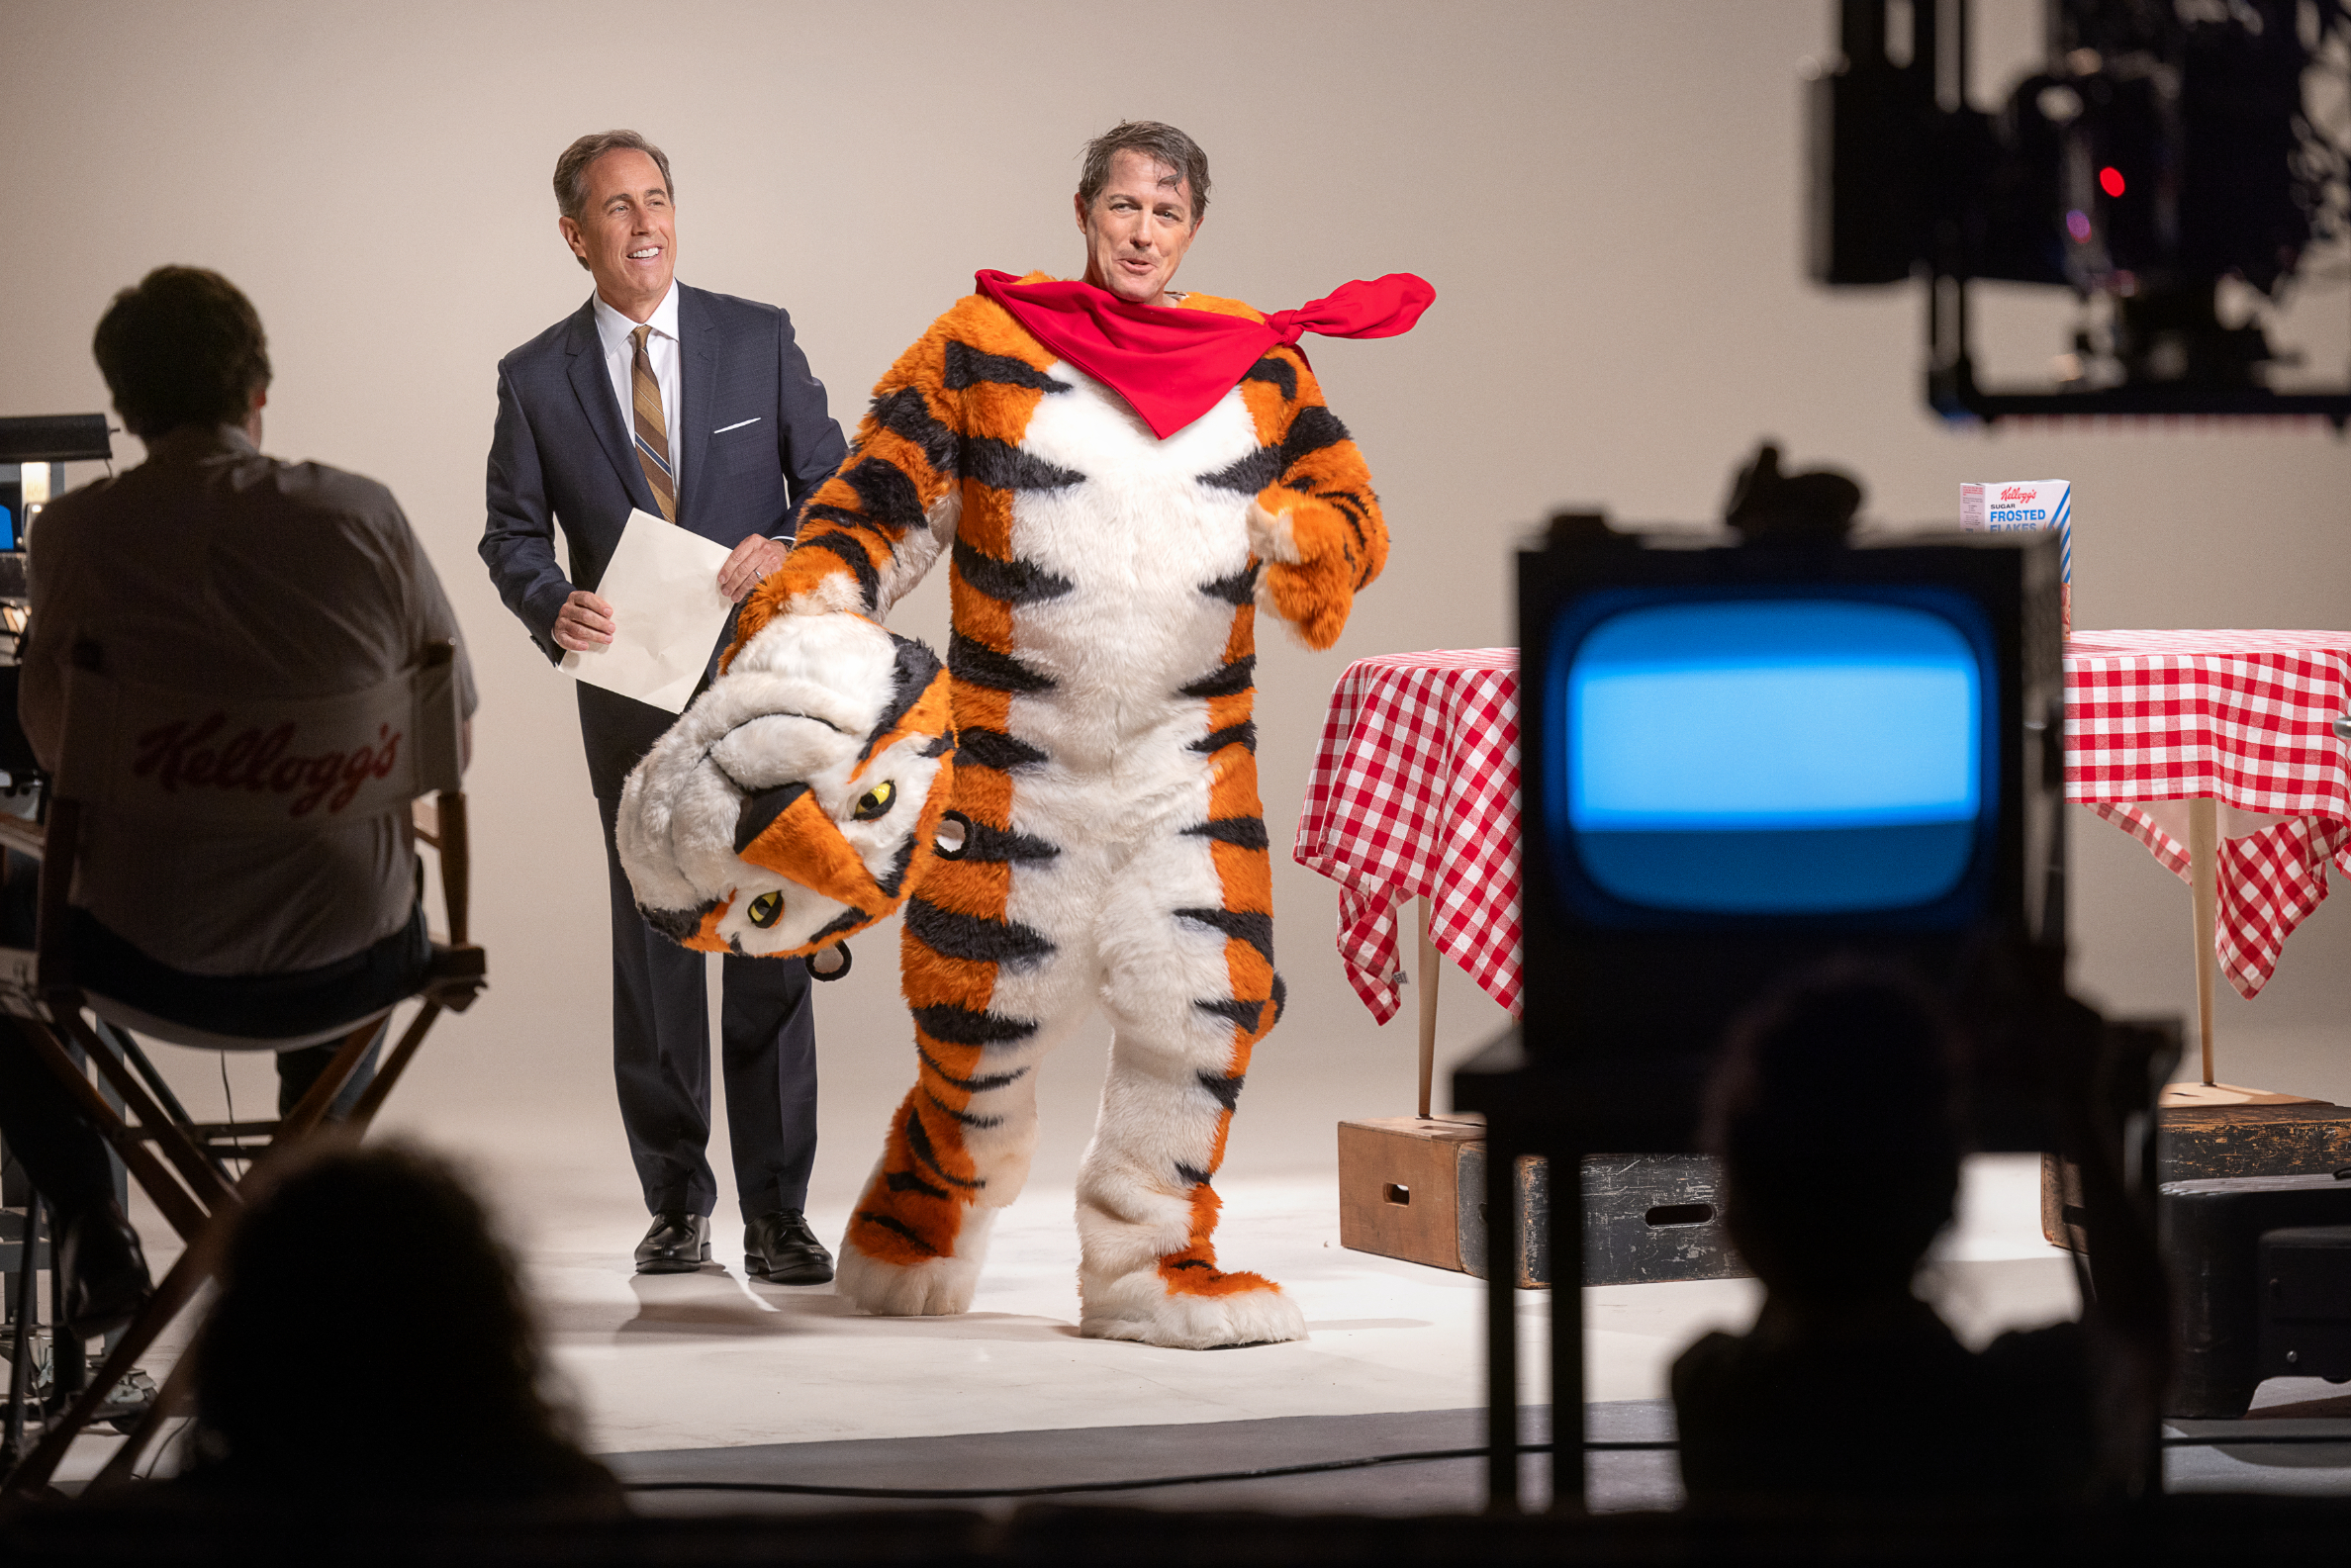 Bill Gates in a tiger costume with a red scarf on a set, being interviewed by a man in a suit